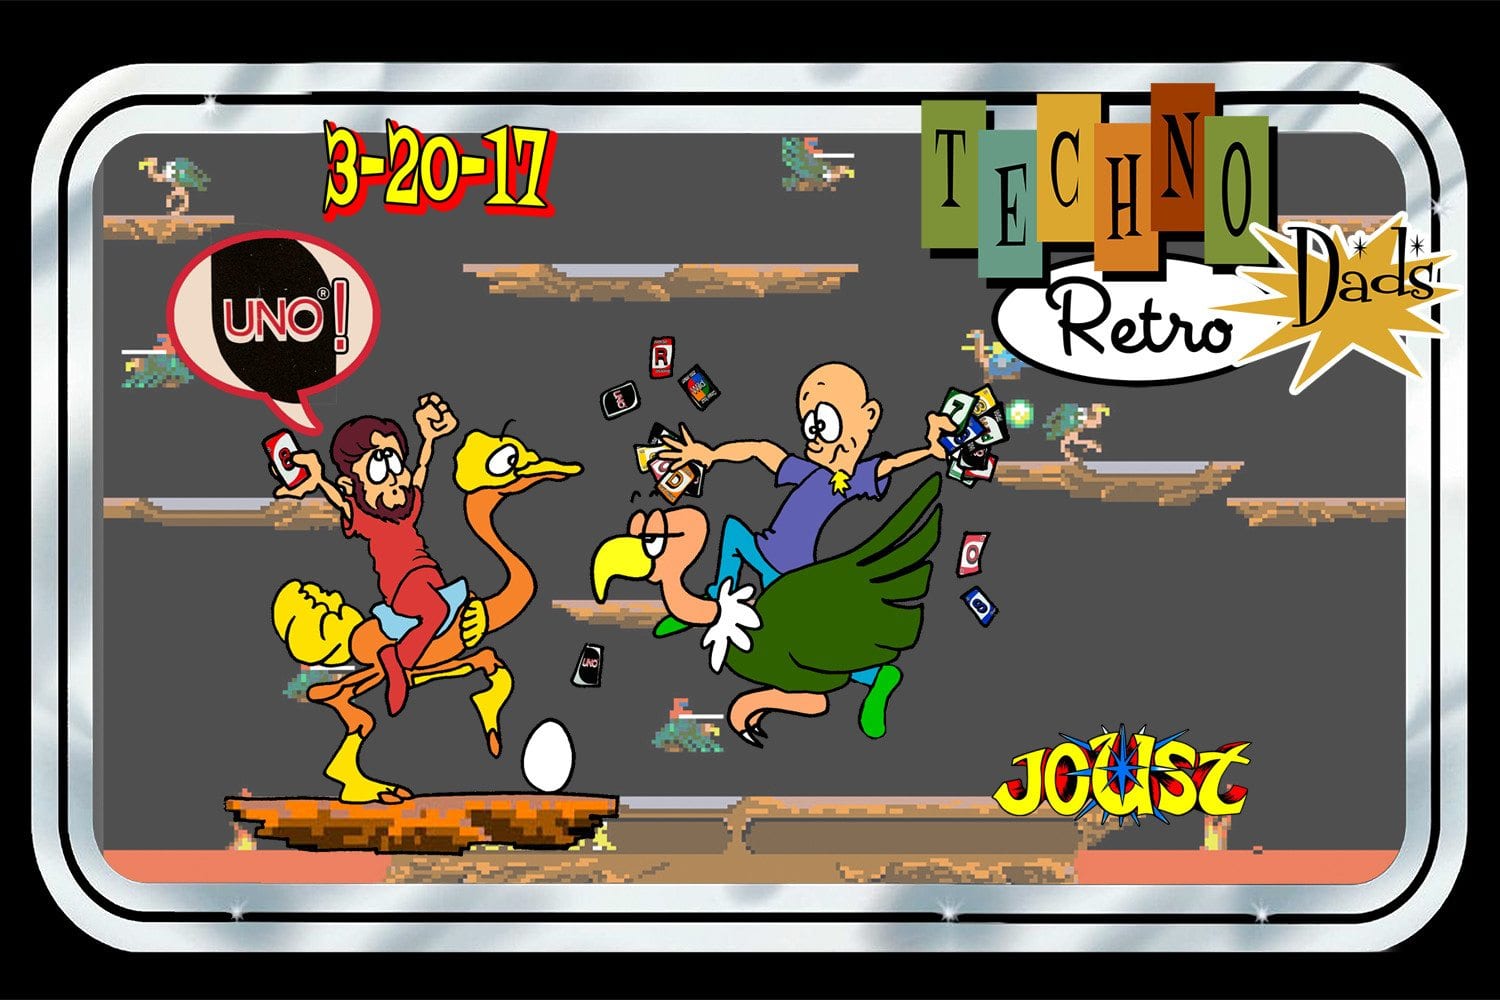 TechnoRetro Dads: UNO, You Joust Ought to Play These Games People Play